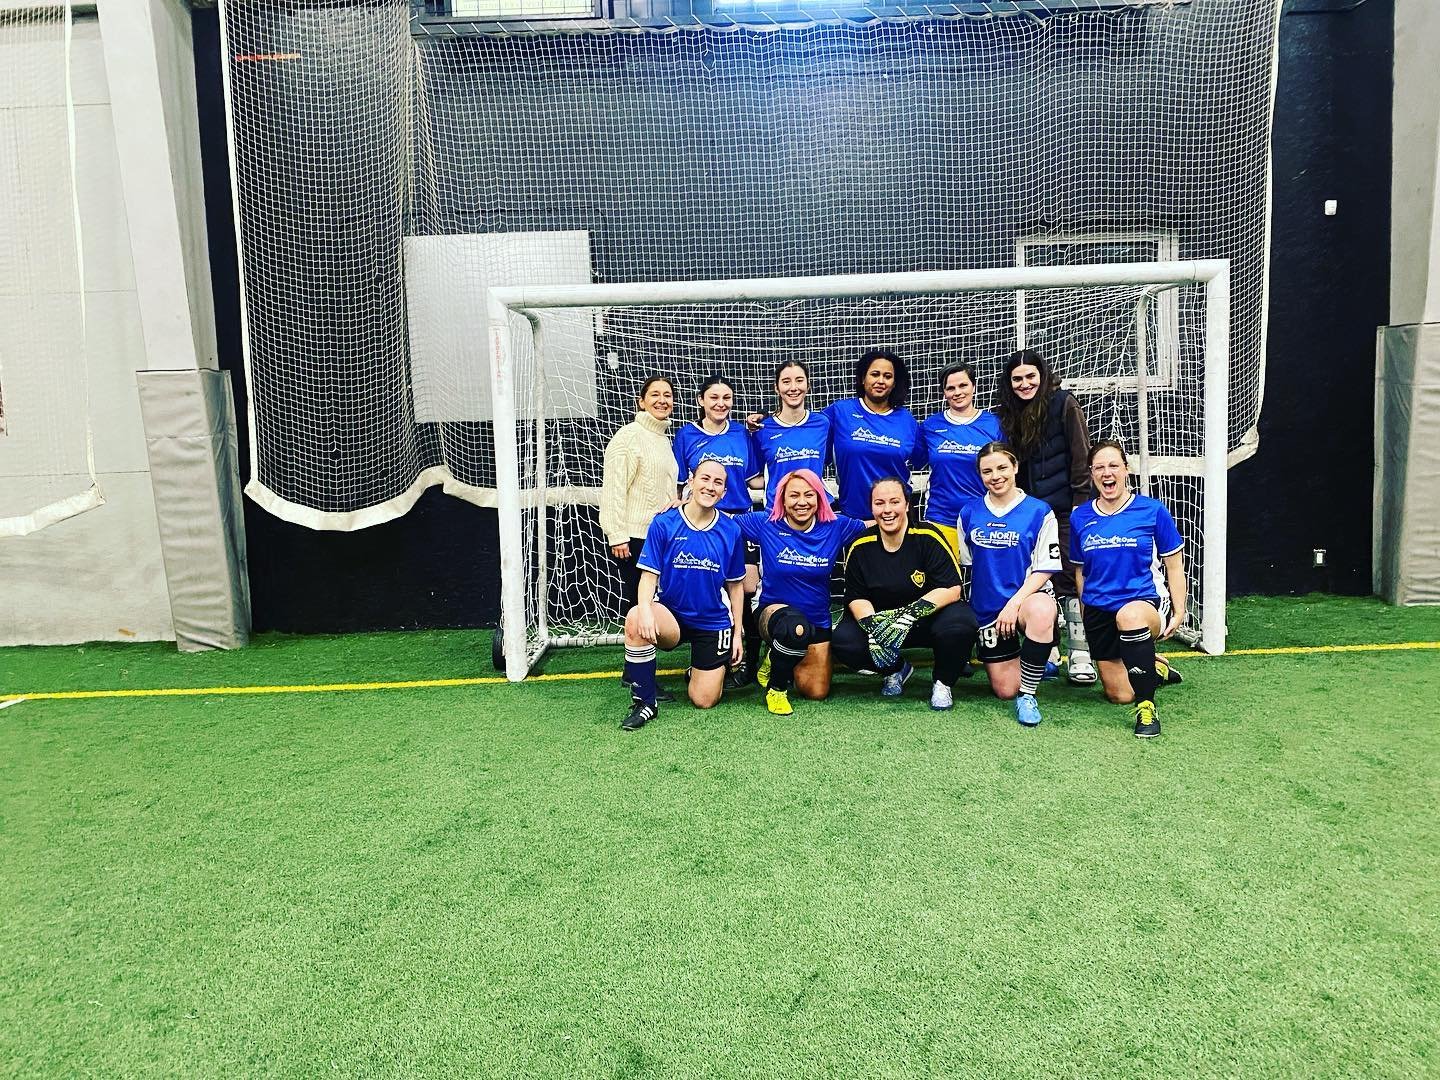 Lady Shooters Soccer League, Vaughan summer indoor registration is now open.  50 min games played on Double Size Fields, Mon &amp;/or Wed night leagues, 18 yrs+ @Trio Sportsplex on Cityview, Team and Individual Registrations To register pls go to: ww